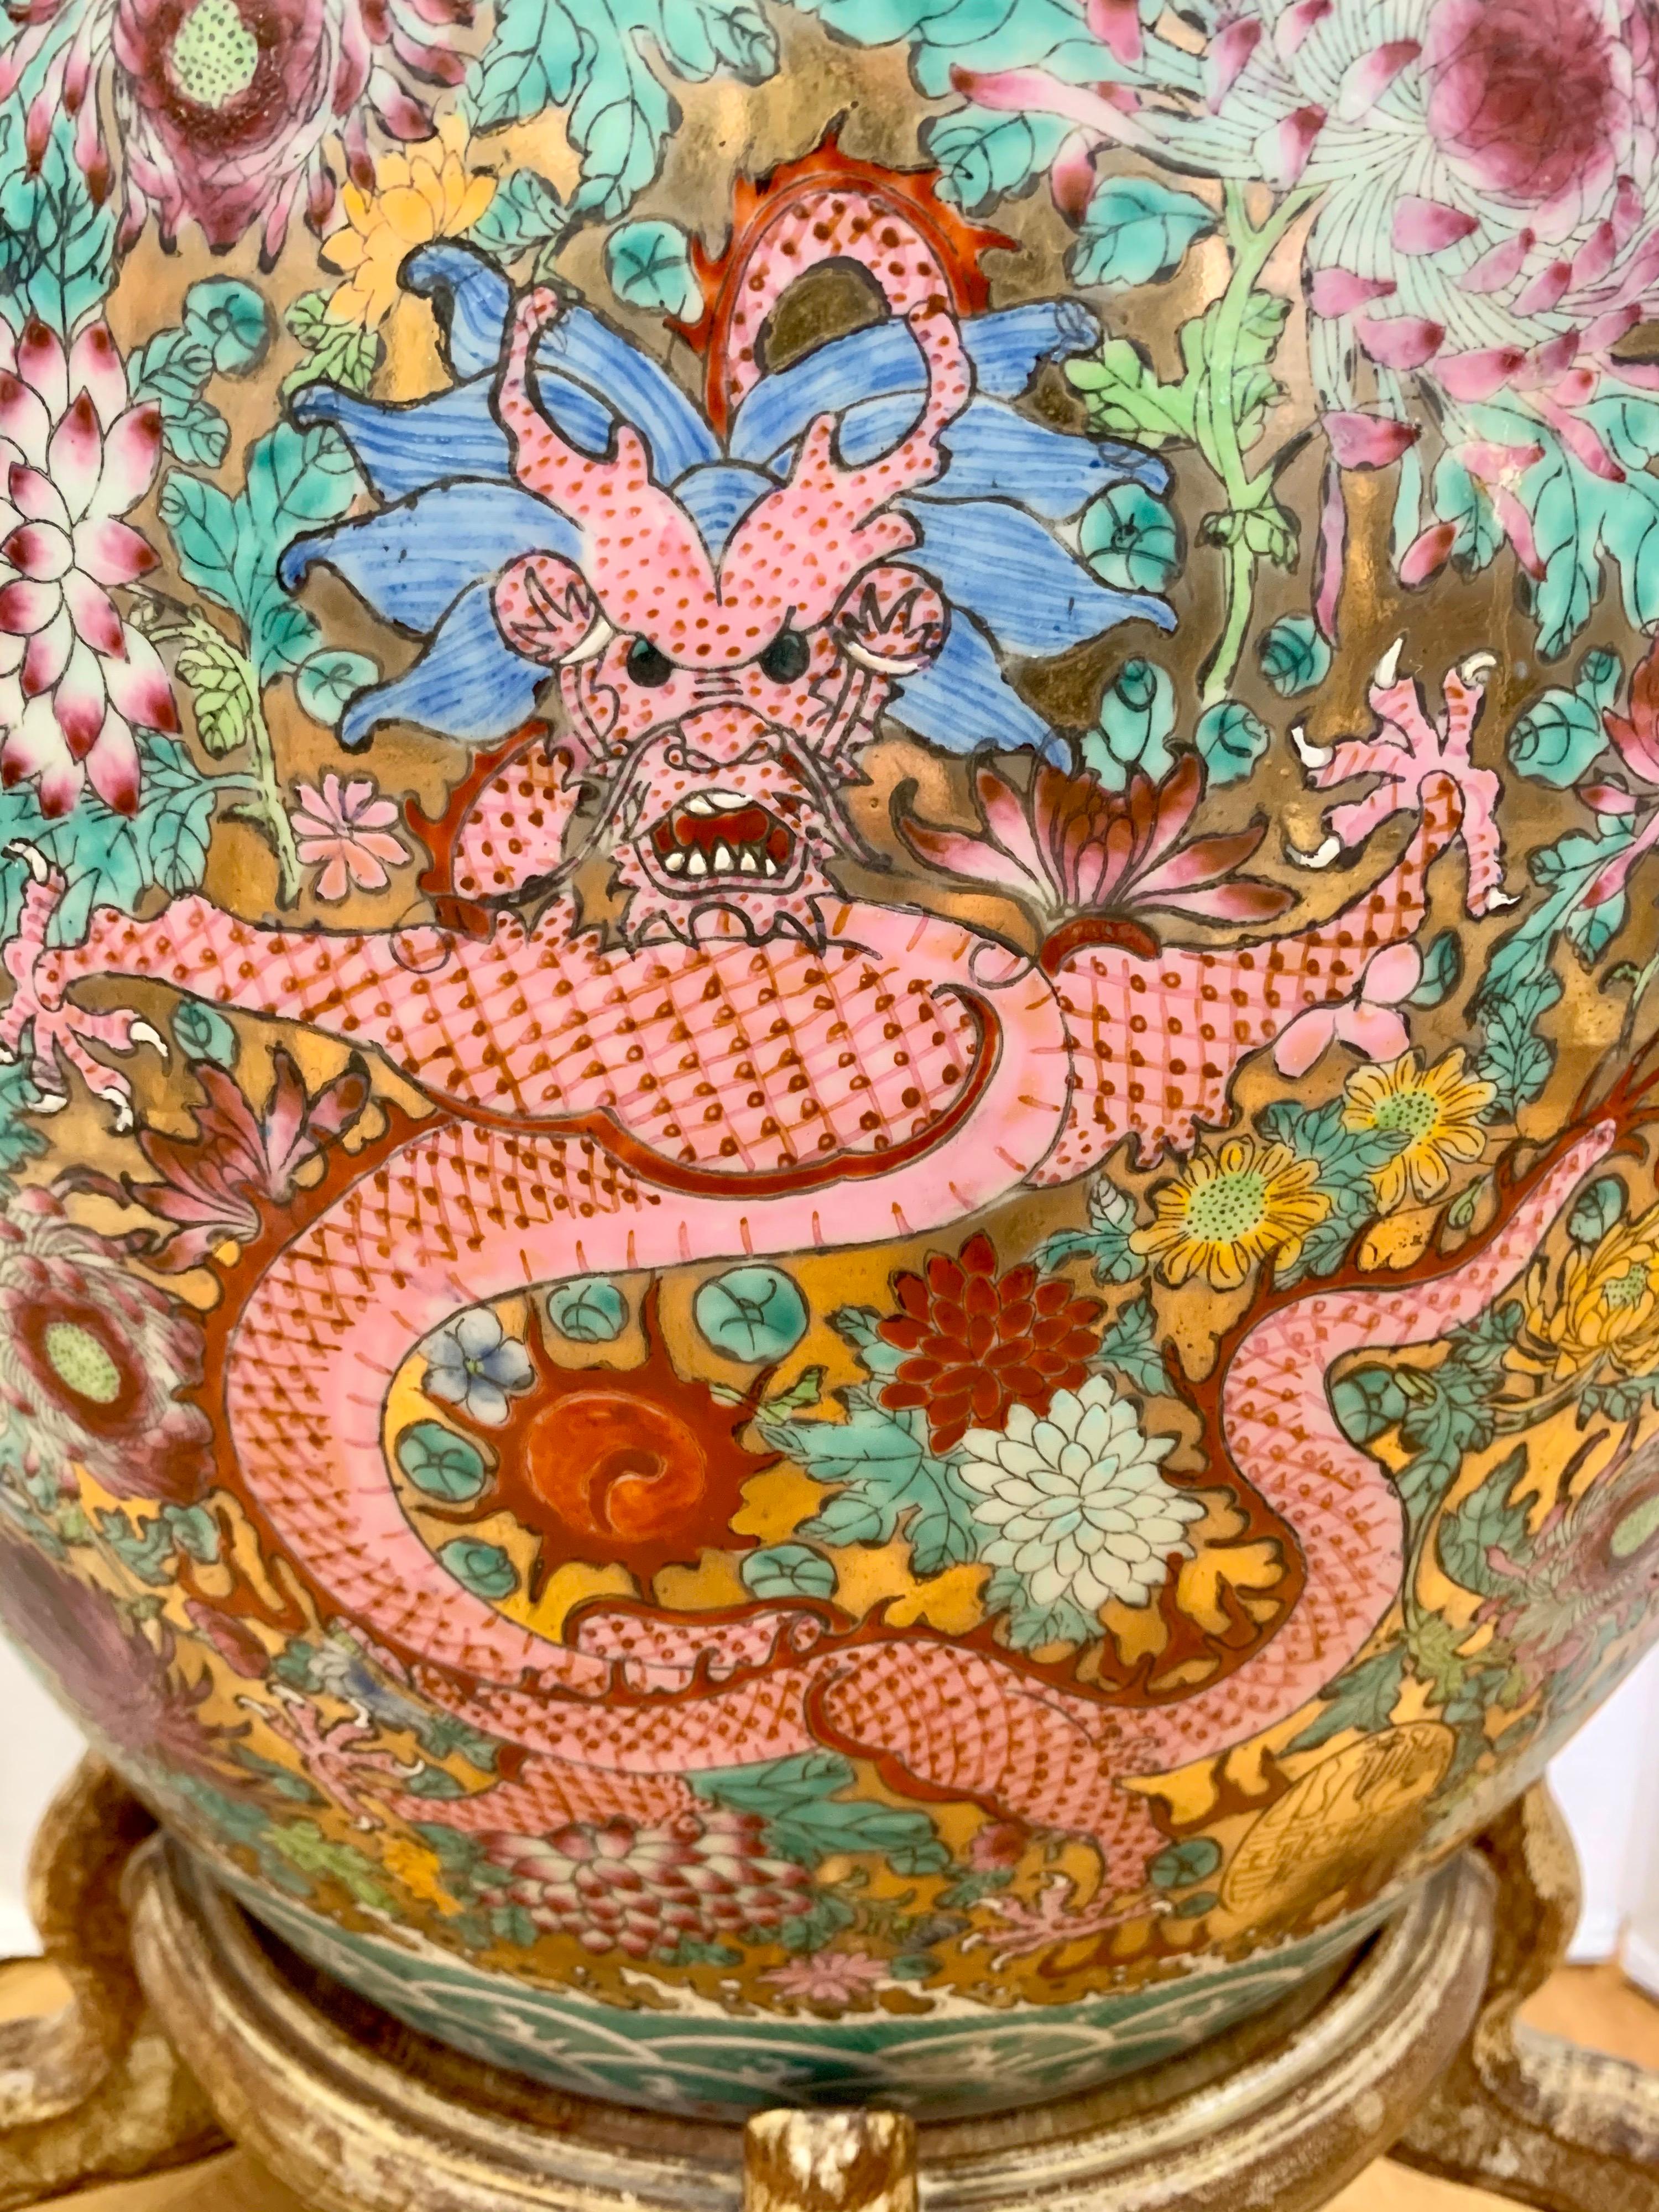 Exquisite Chinese porcelain jardinière planter features intricate hand painted colorful dragons on a gold metallic colored background with peonies and foliate decoration. Geometric decorates the top rim and base. It rests on a carved wood base.